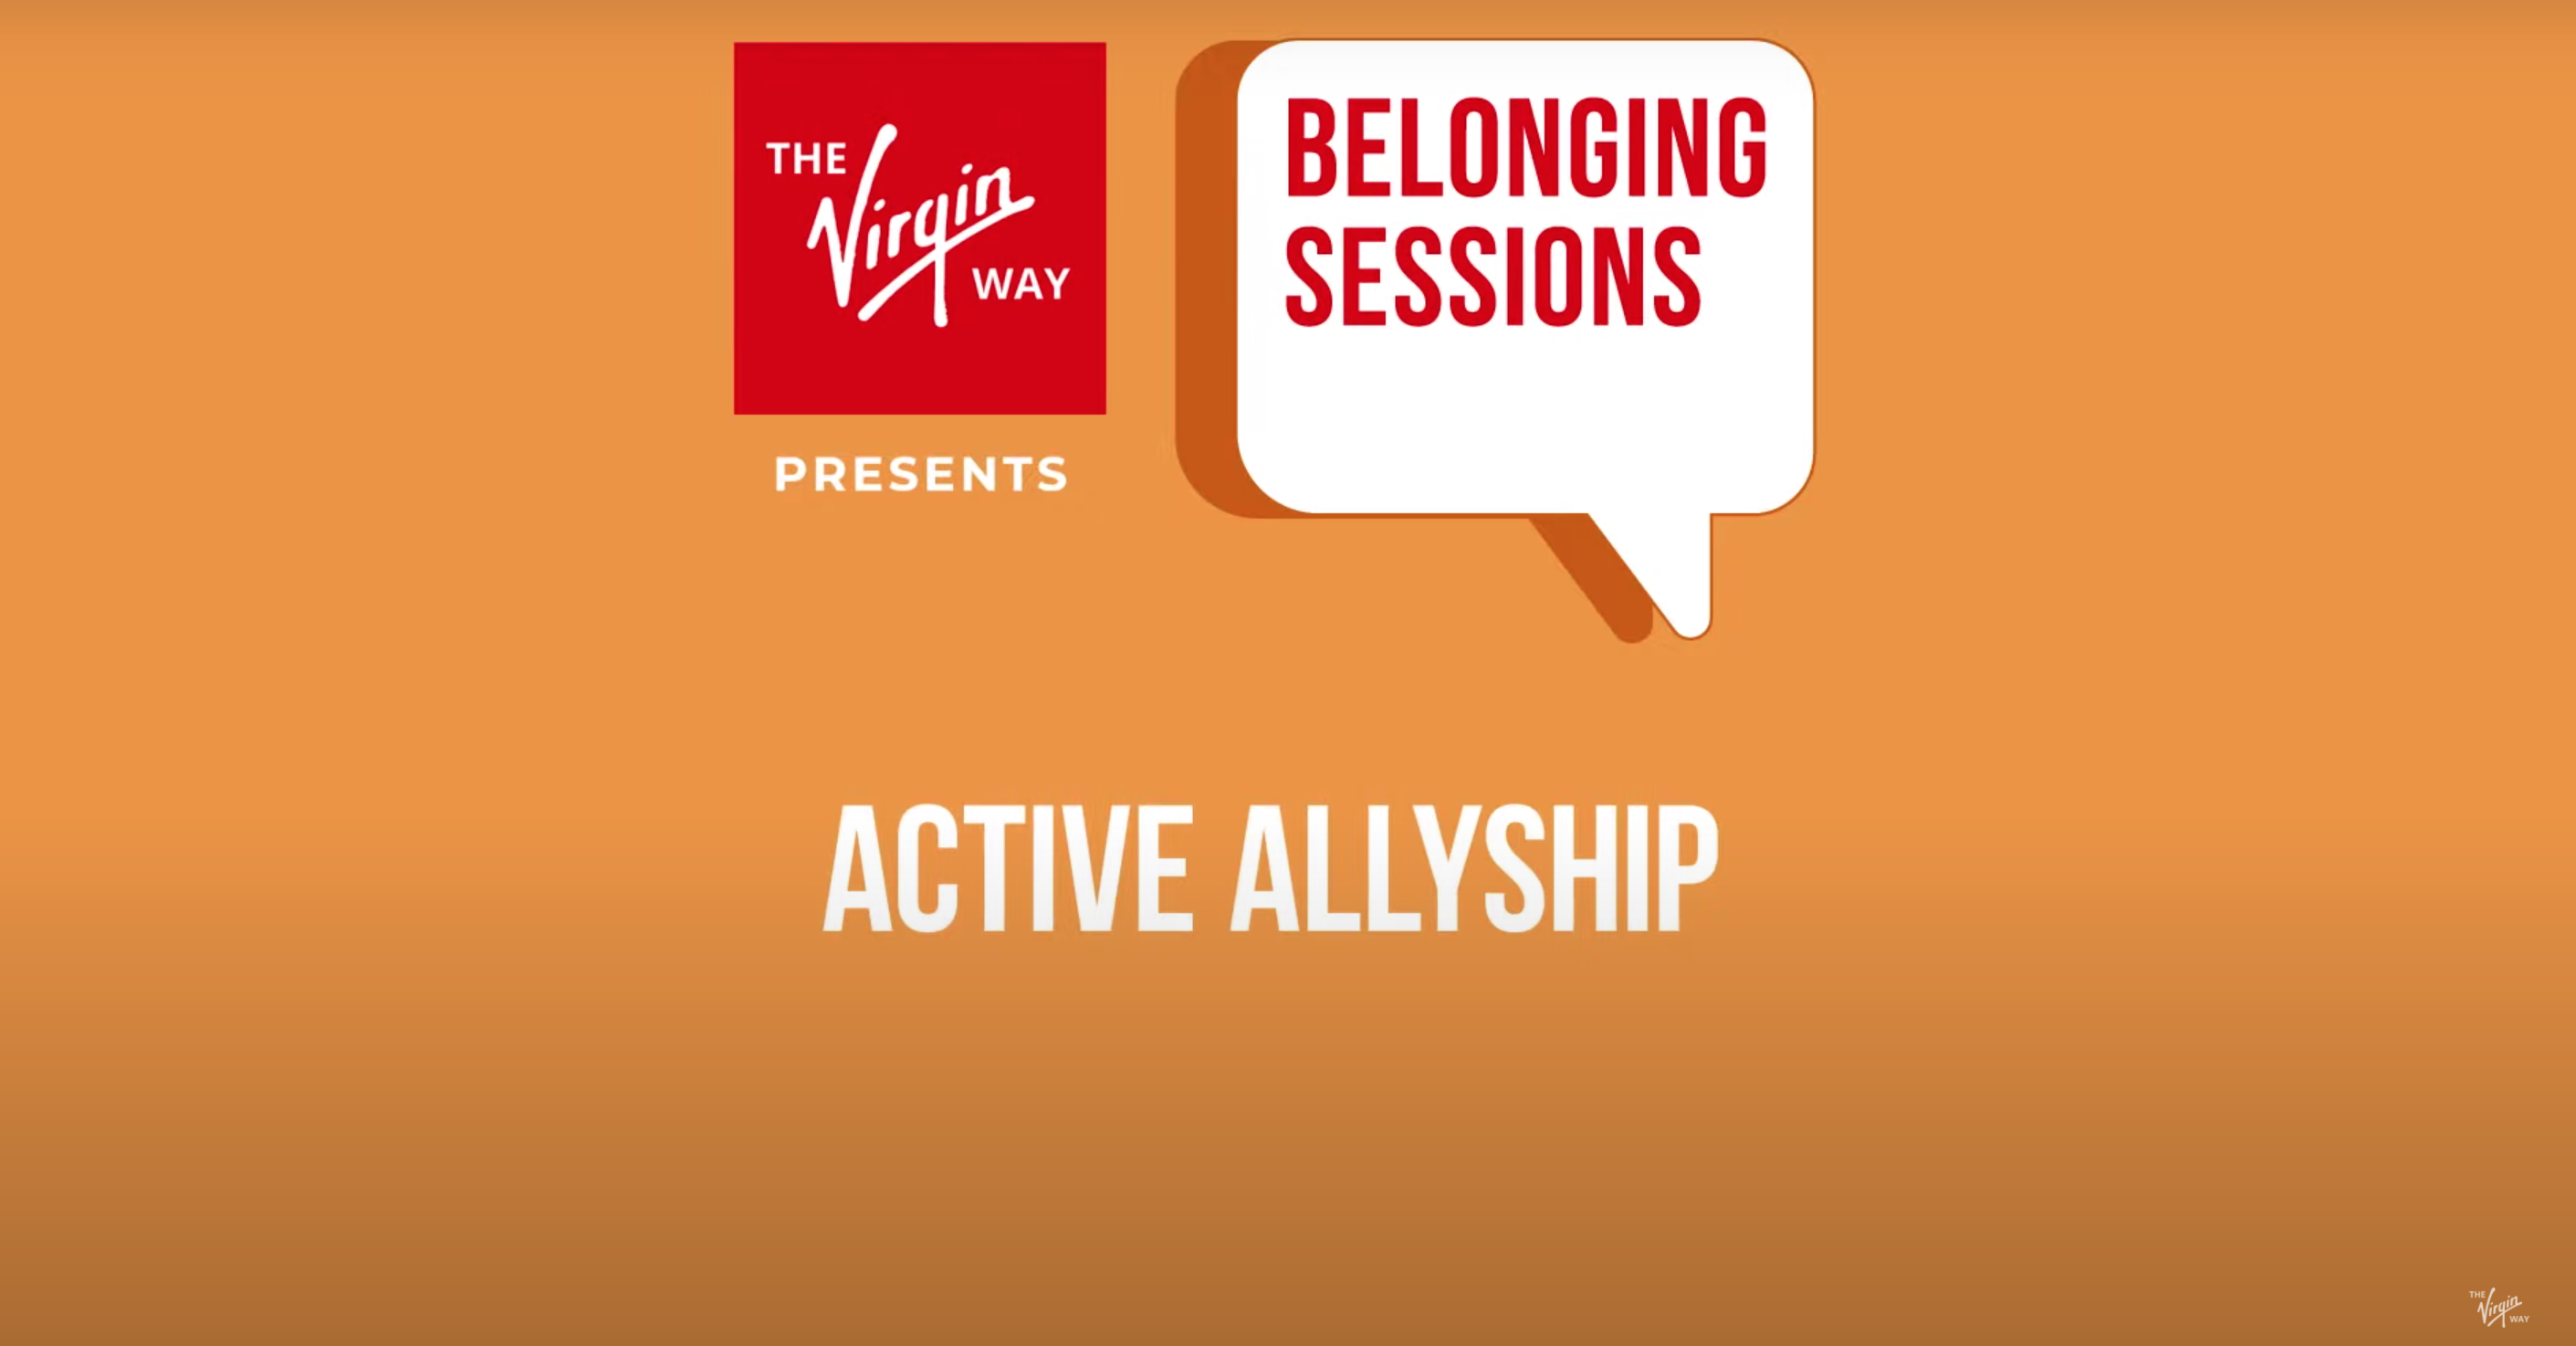 Poster for The Virgin Way's Belonging Session titled 'Active Allyship'